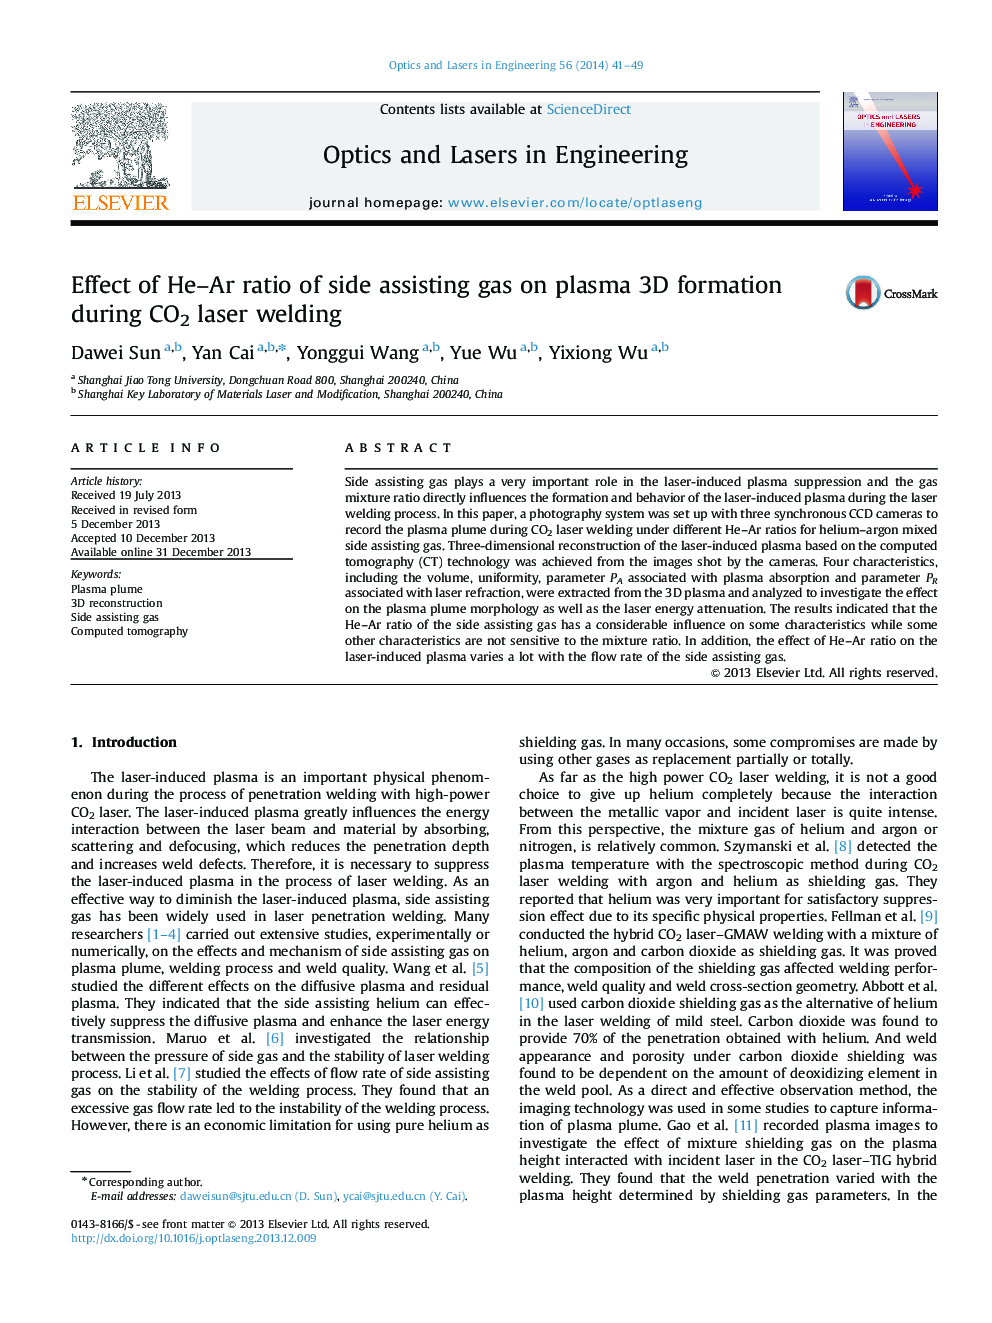 Effect of He–Ar ratio of side assisting gas on plasma 3D formation during CO2 laser welding